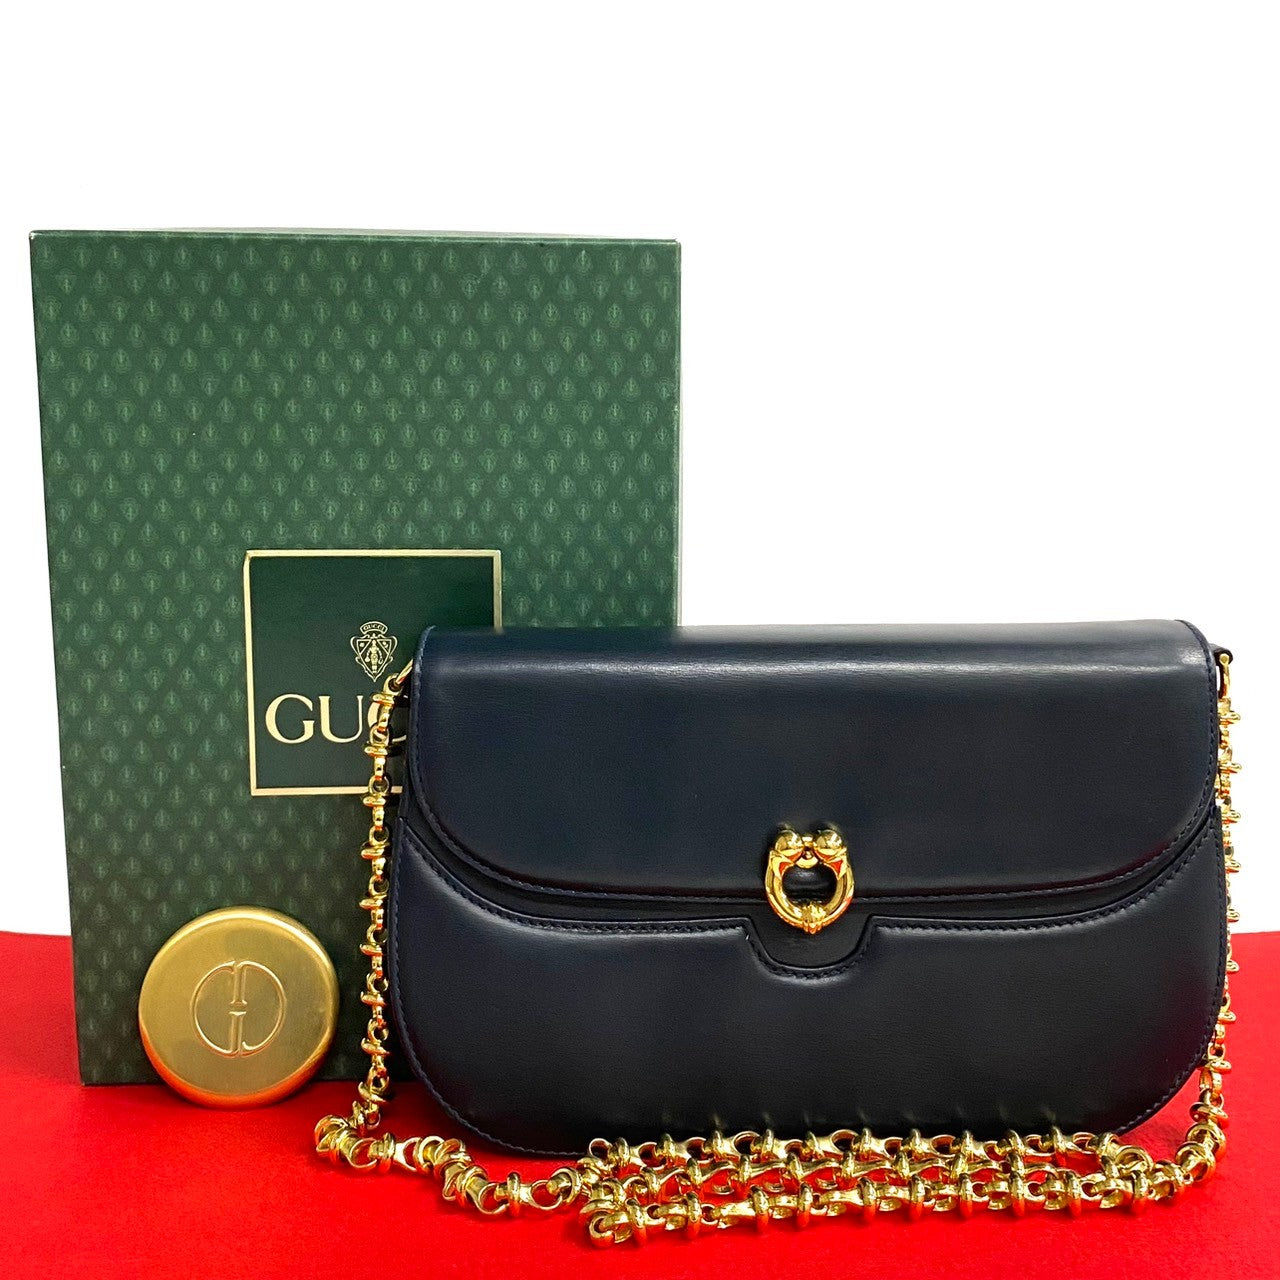 Gucci Leather Chain Crossbody Bag  Leather Crossbody Bag in Excellent condition